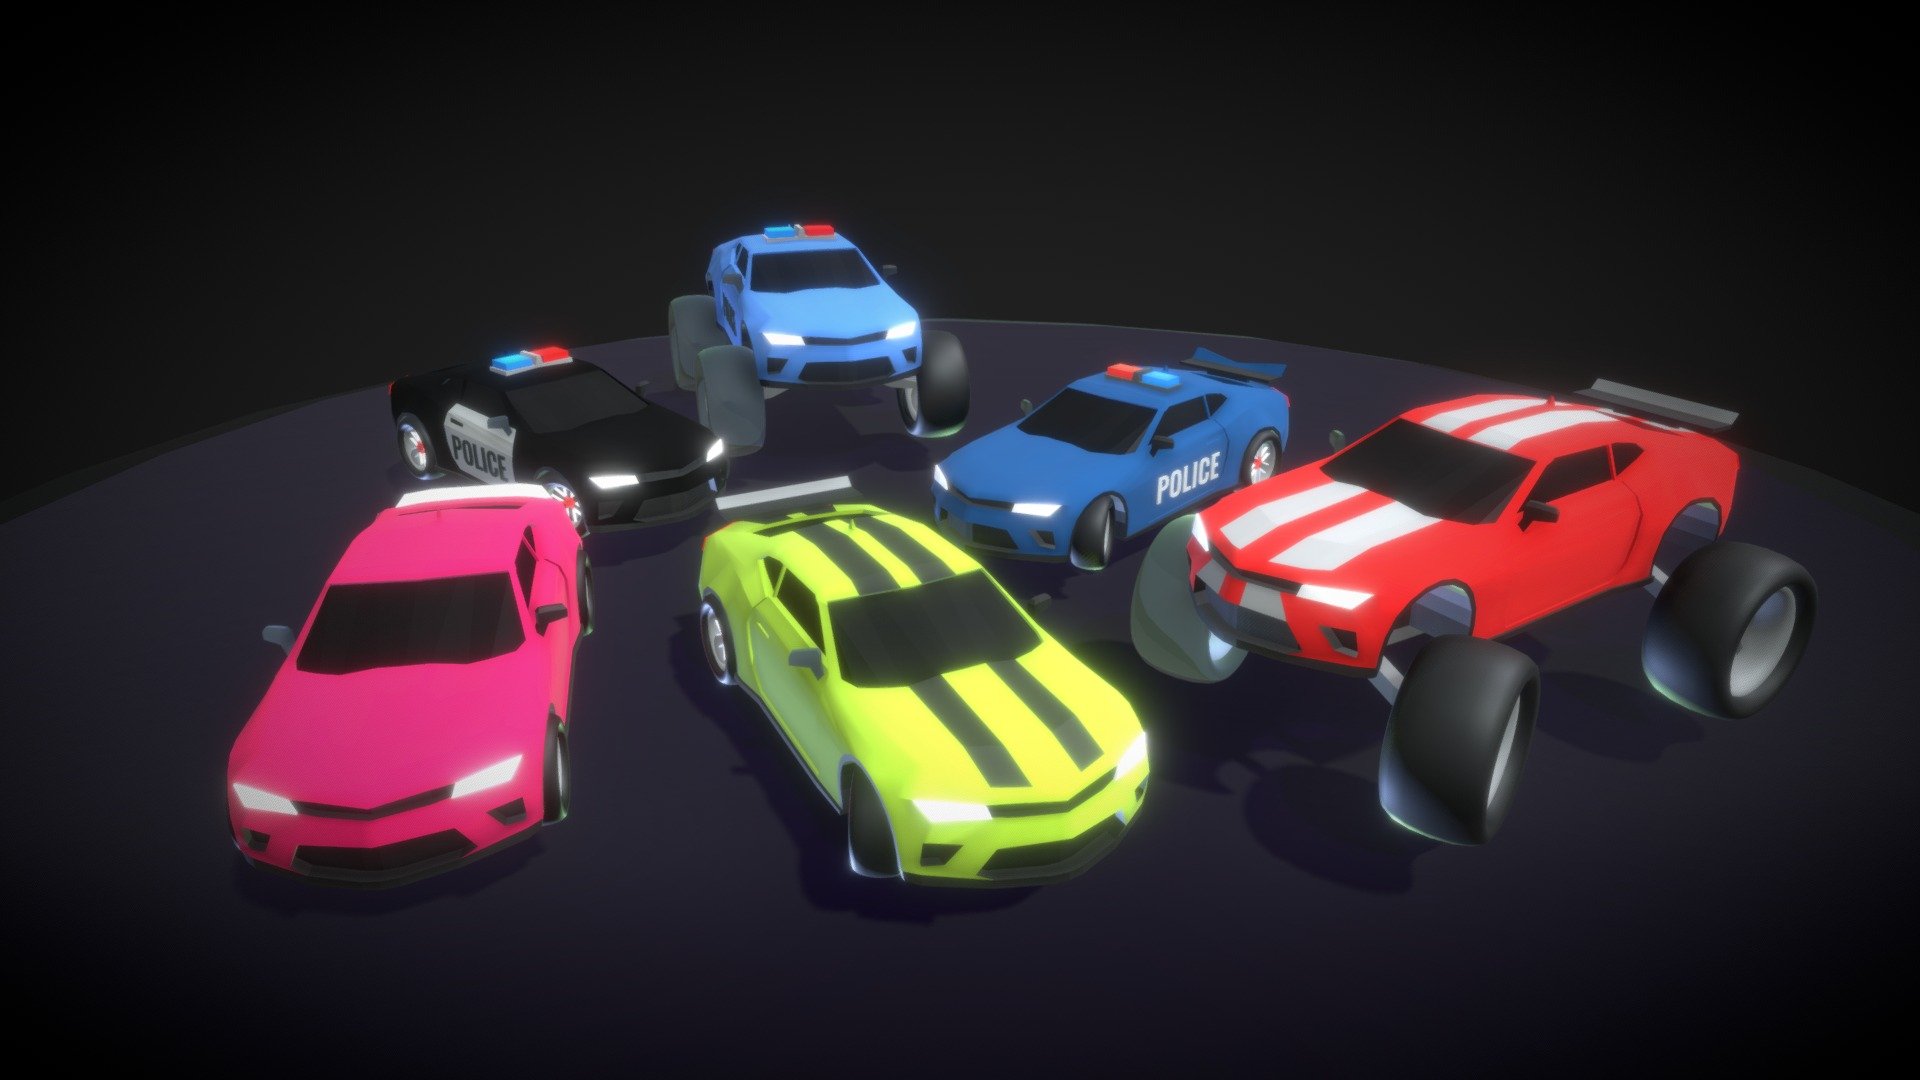 Low Poly 6 3D Vehicles For Games Like FPS / Car Driving Game.

This 3D Model Includes 6 Cars With Different Functions And Colors




Sports Racing Car

Standard Racing Car

Sports Monster Truck



Super Police Car

Standard Police Car

Police Monster Truck

This 3D Model Also Includes Some Materials For You To Apply Colors On Your Cars. Thankyou!

Amazing Stuffs Made By Mowahed3D - Low Poly: 3D Vehicles - 6 Cars Pack - Buy Royalty Free 3D model by Mowahed 3D (@mowahedrehan) 3d model